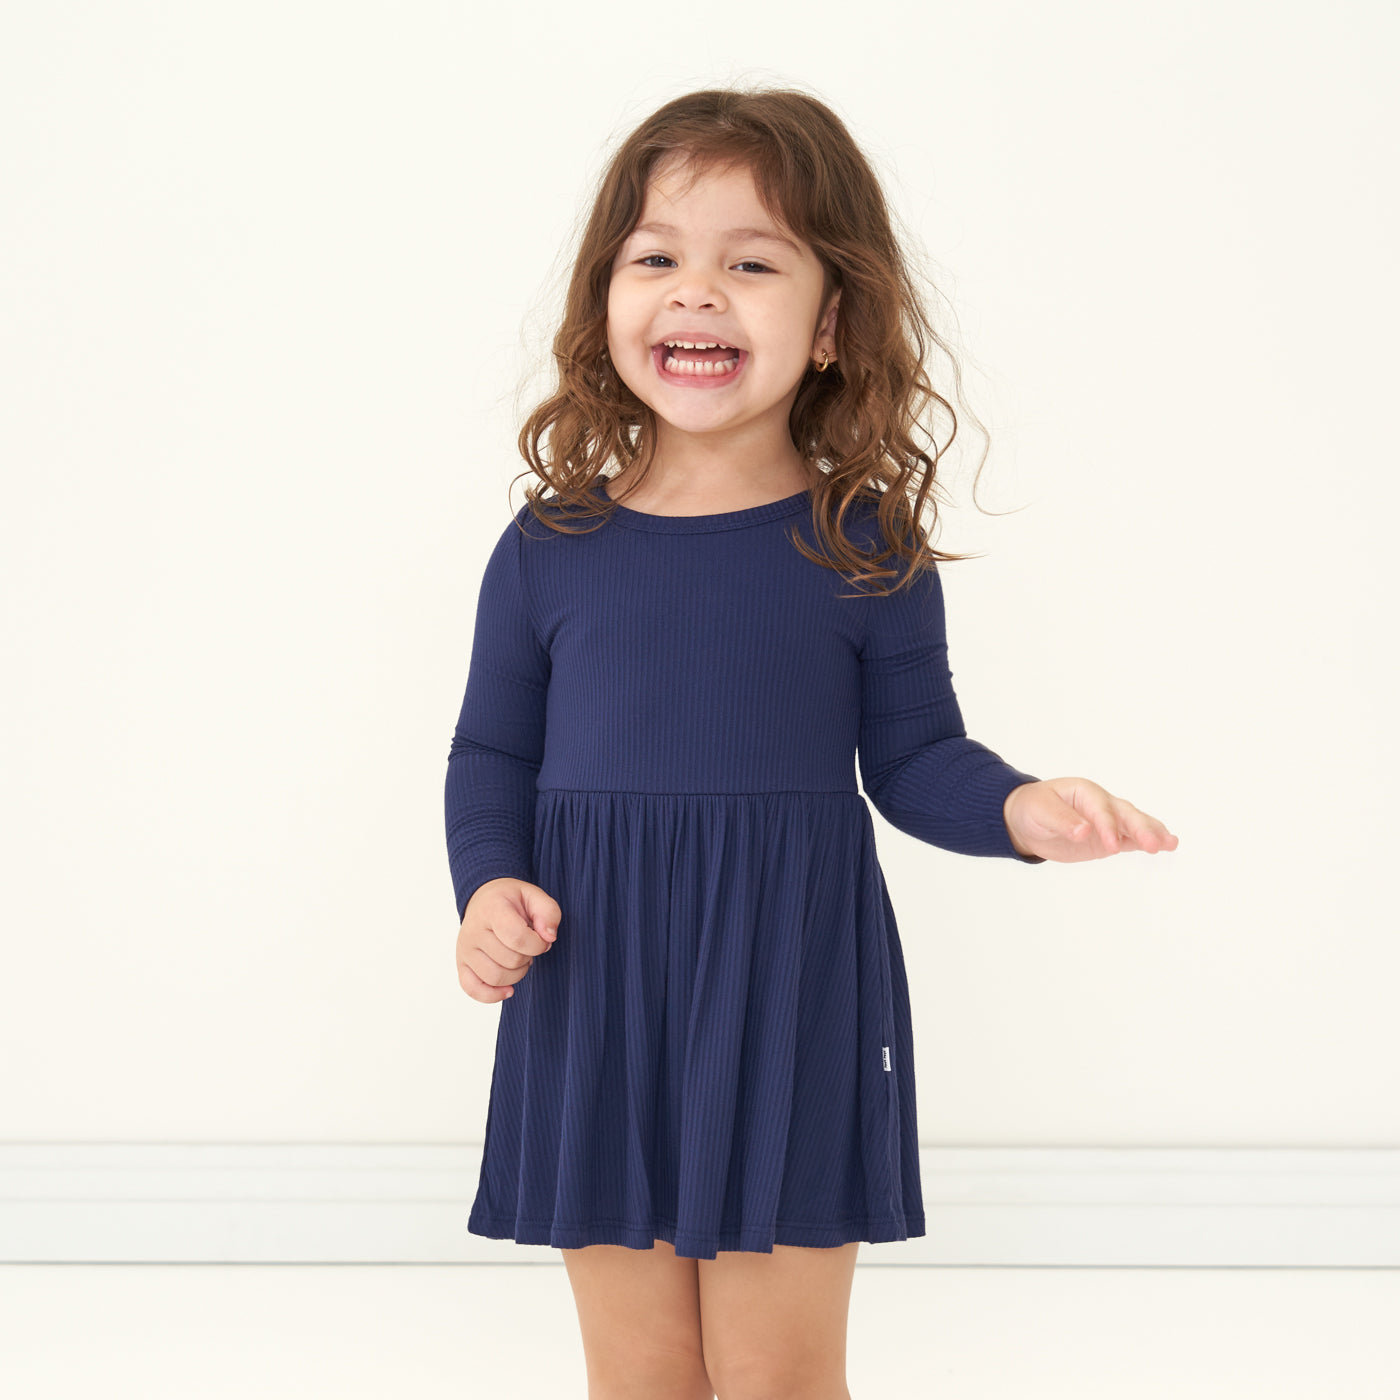 Child wearing a Classic Navy ribbed twirl dress with bodysuit